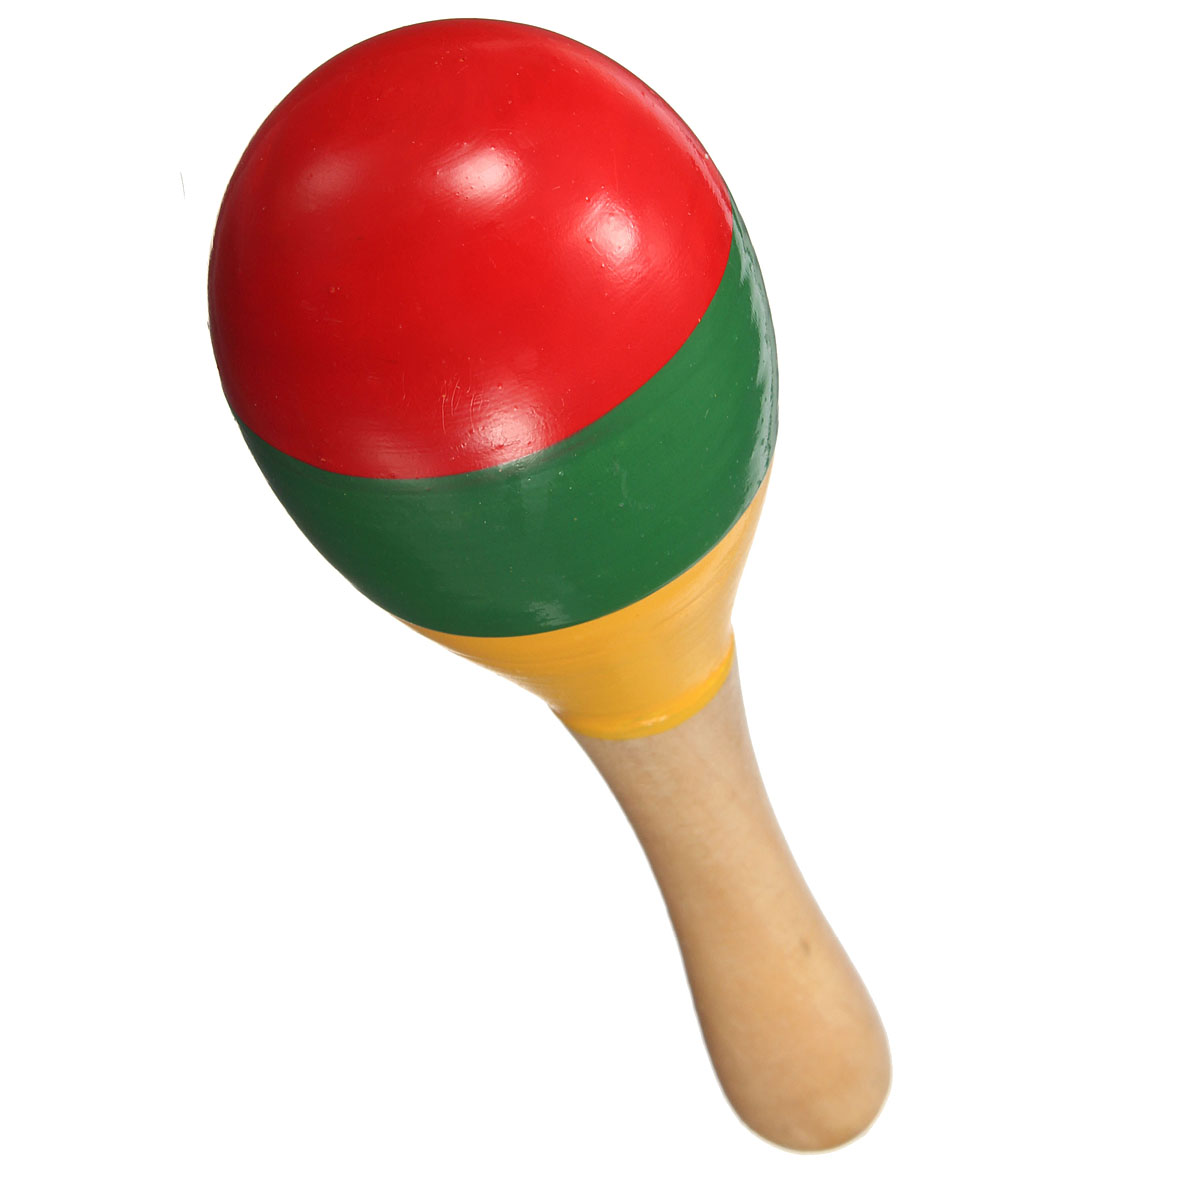 Popular-Kids-Baby-Sound-Music-Toddler-Rattle-Musical-Wooden-Colorful-Toys-Gift-1040312